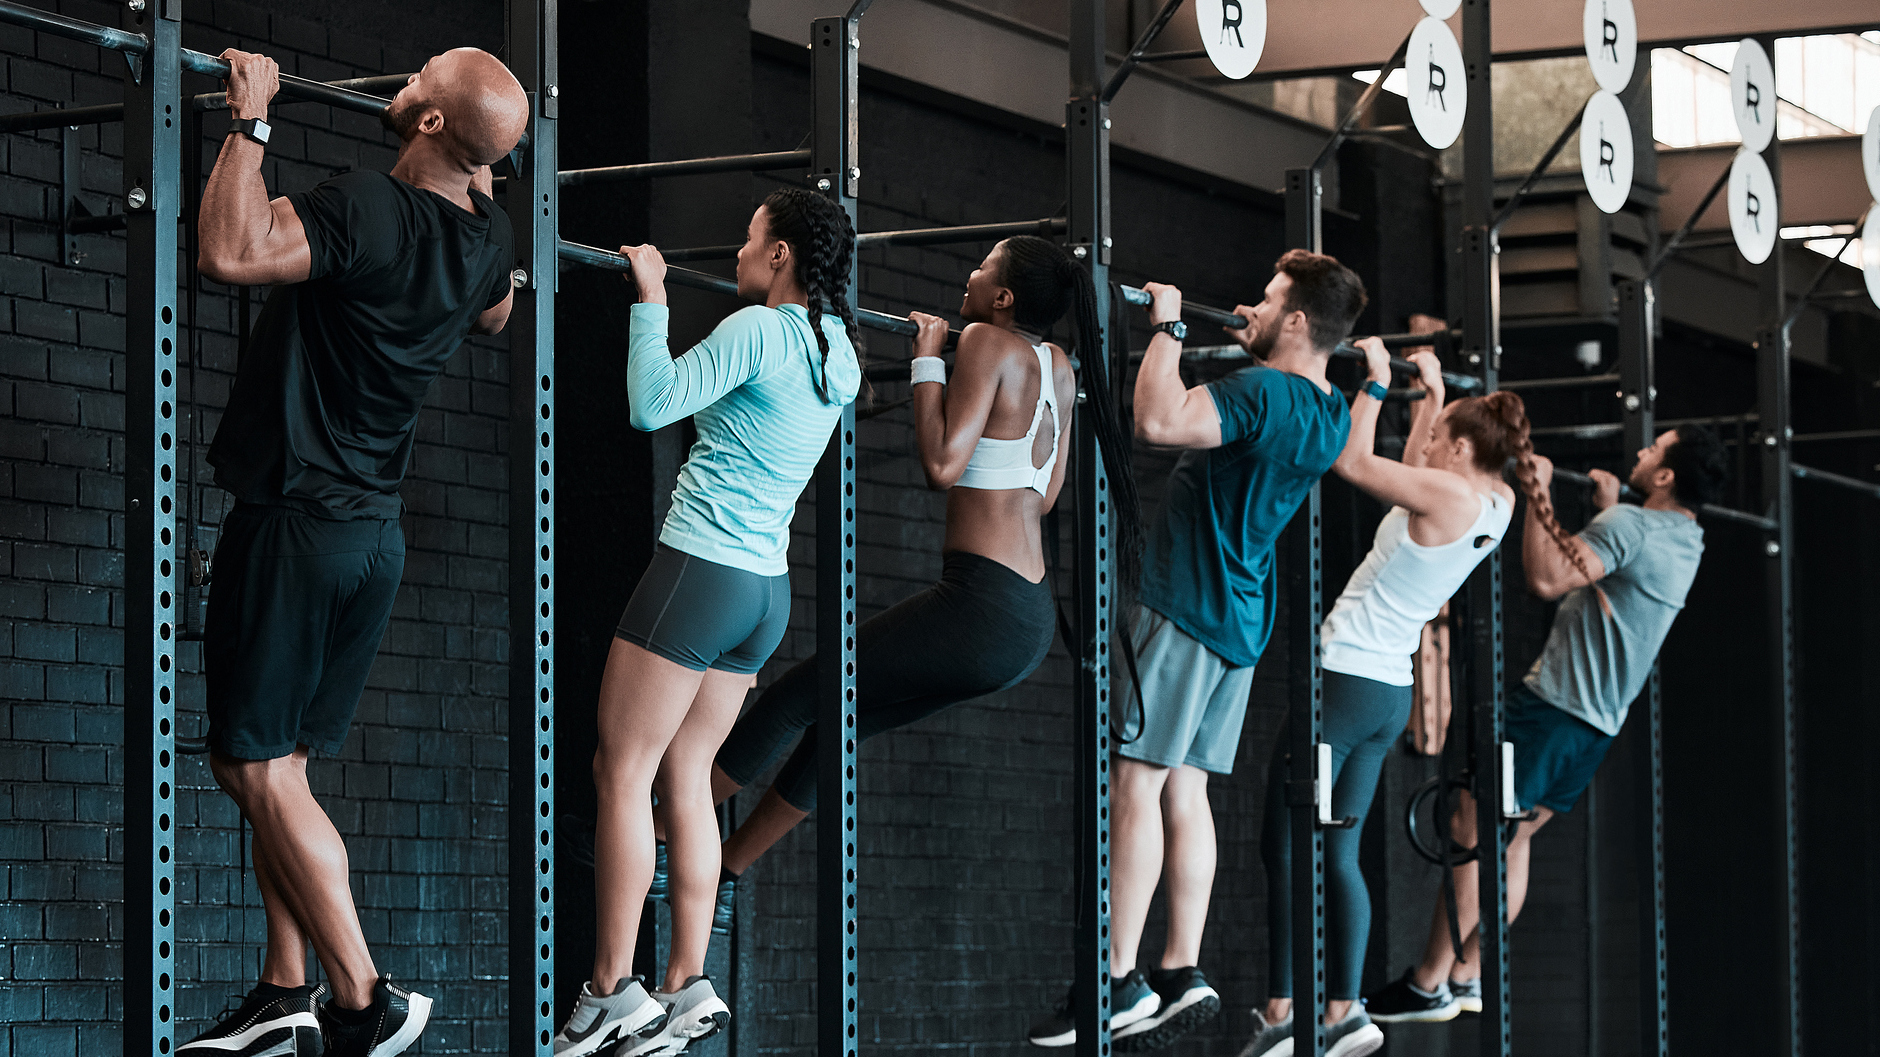 How To Master The Pull-Up—One Of The Toughest Bodyweight Moves There Is